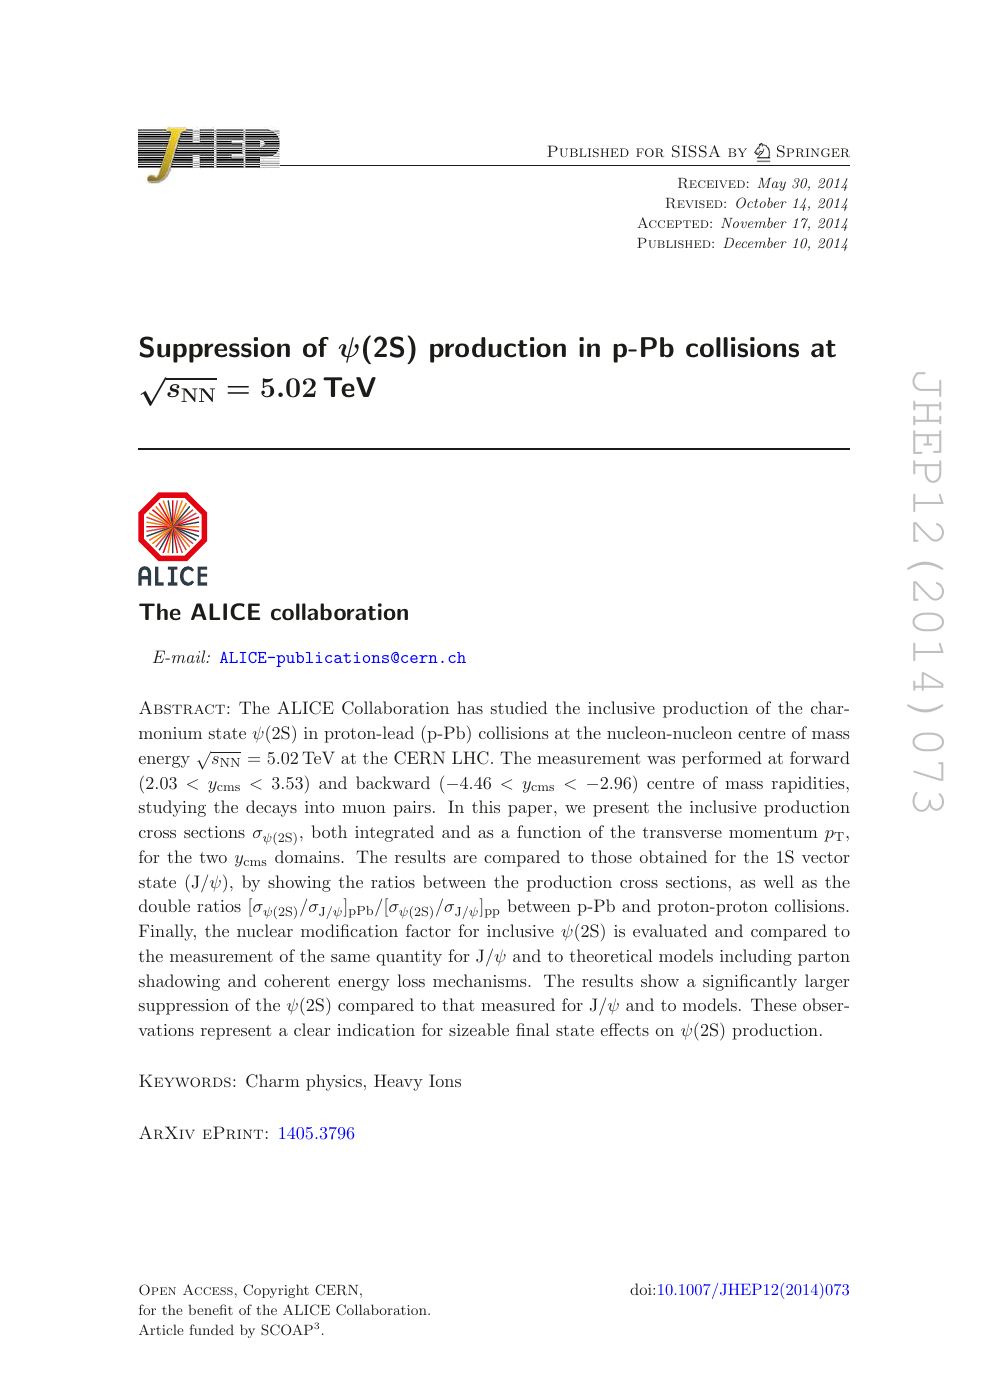 Suppression Of Ps 2s Production In P Pb Collisions At S N N Sqrt S Mathrm Nn 5 02 Tev Topic Of Research Paper In Physical Sciences Download Scholarly Article Pdf And Read For